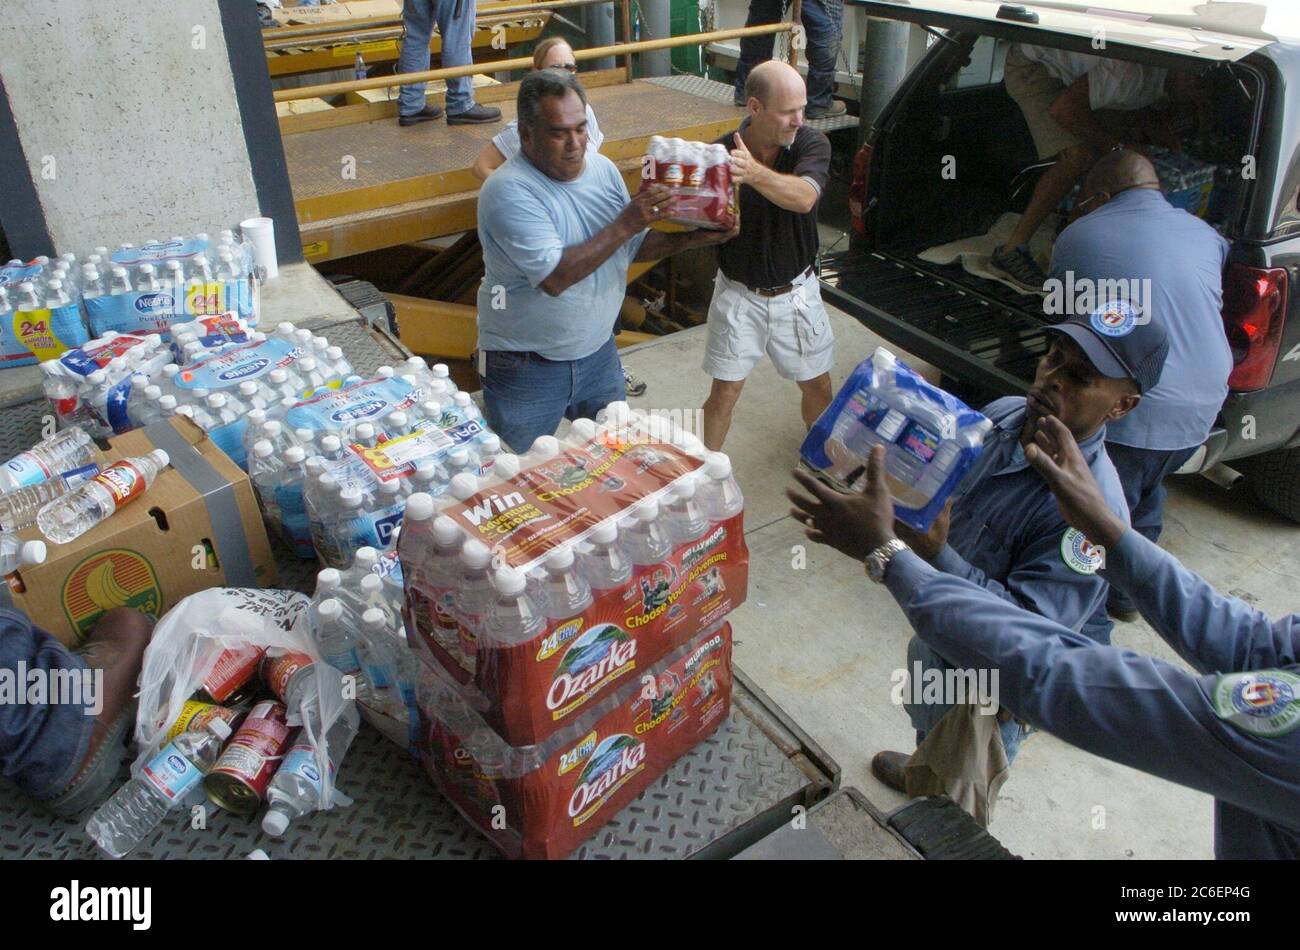 https://c8.alamy.com/comp/2C6EP4G/austin-texas-usa-september-3-2005-refugees-from-hurricane-katrina-continue-to-pour-into-texas-shelters-including-the-austin-convention-center-which-is-expecting-over-5000-people-in-the-next-three-days-city-of-austin-employees-unload-bottled-water-for-evacuees-bob-daemmrich-2C6EP4G.jpg